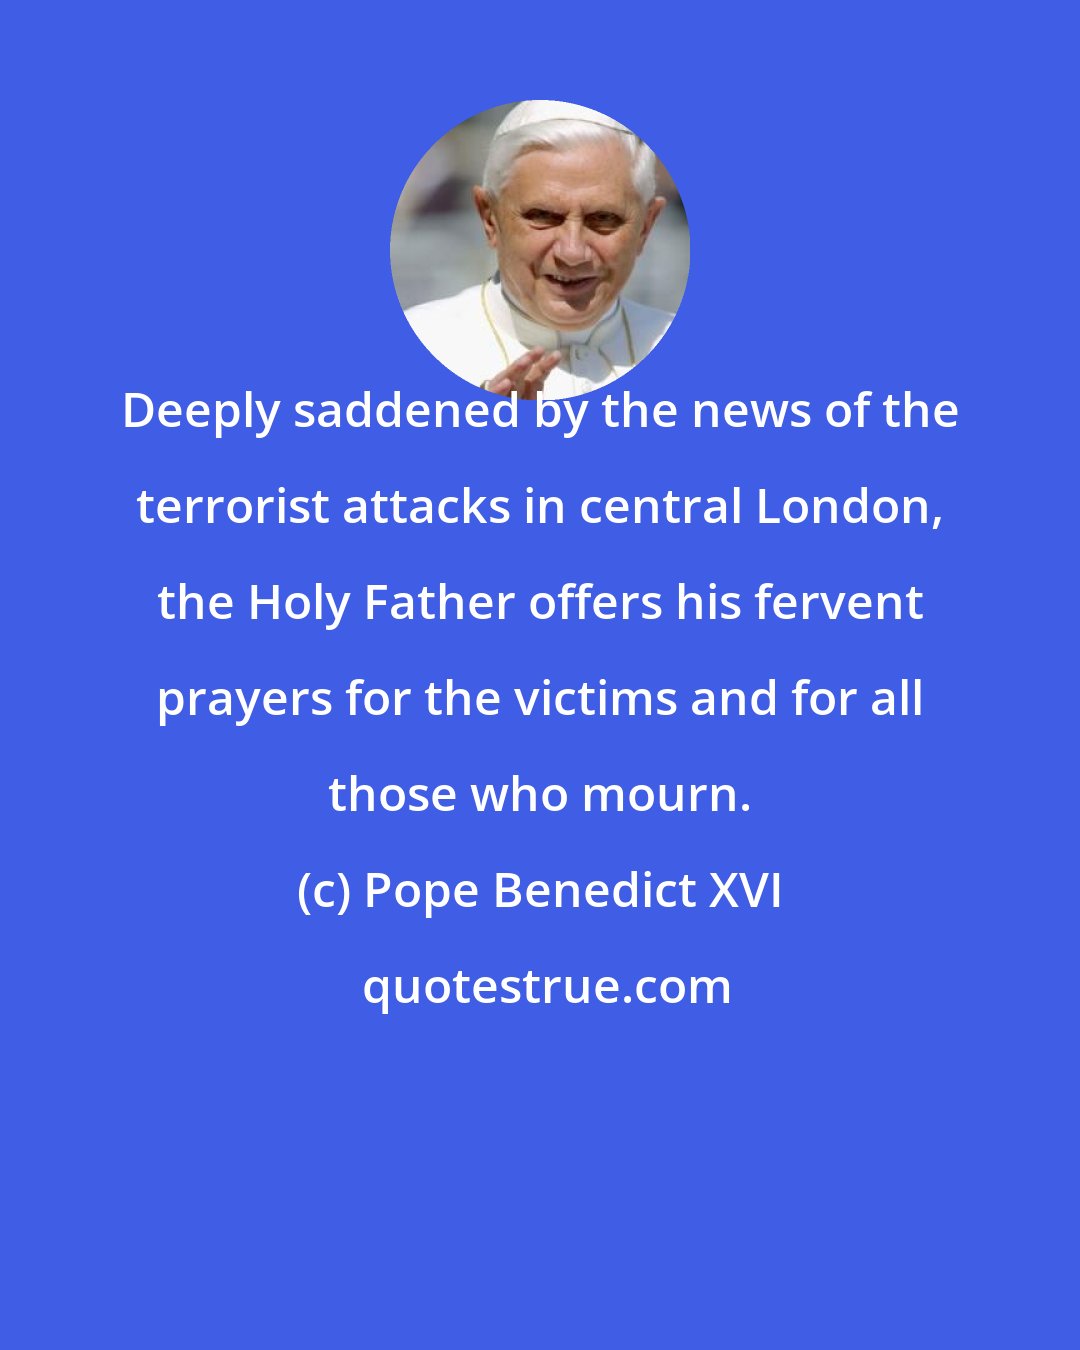 Pope Benedict XVI: Deeply saddened by the news of the terrorist attacks in central London, the Holy Father offers his fervent prayers for the victims and for all those who mourn.